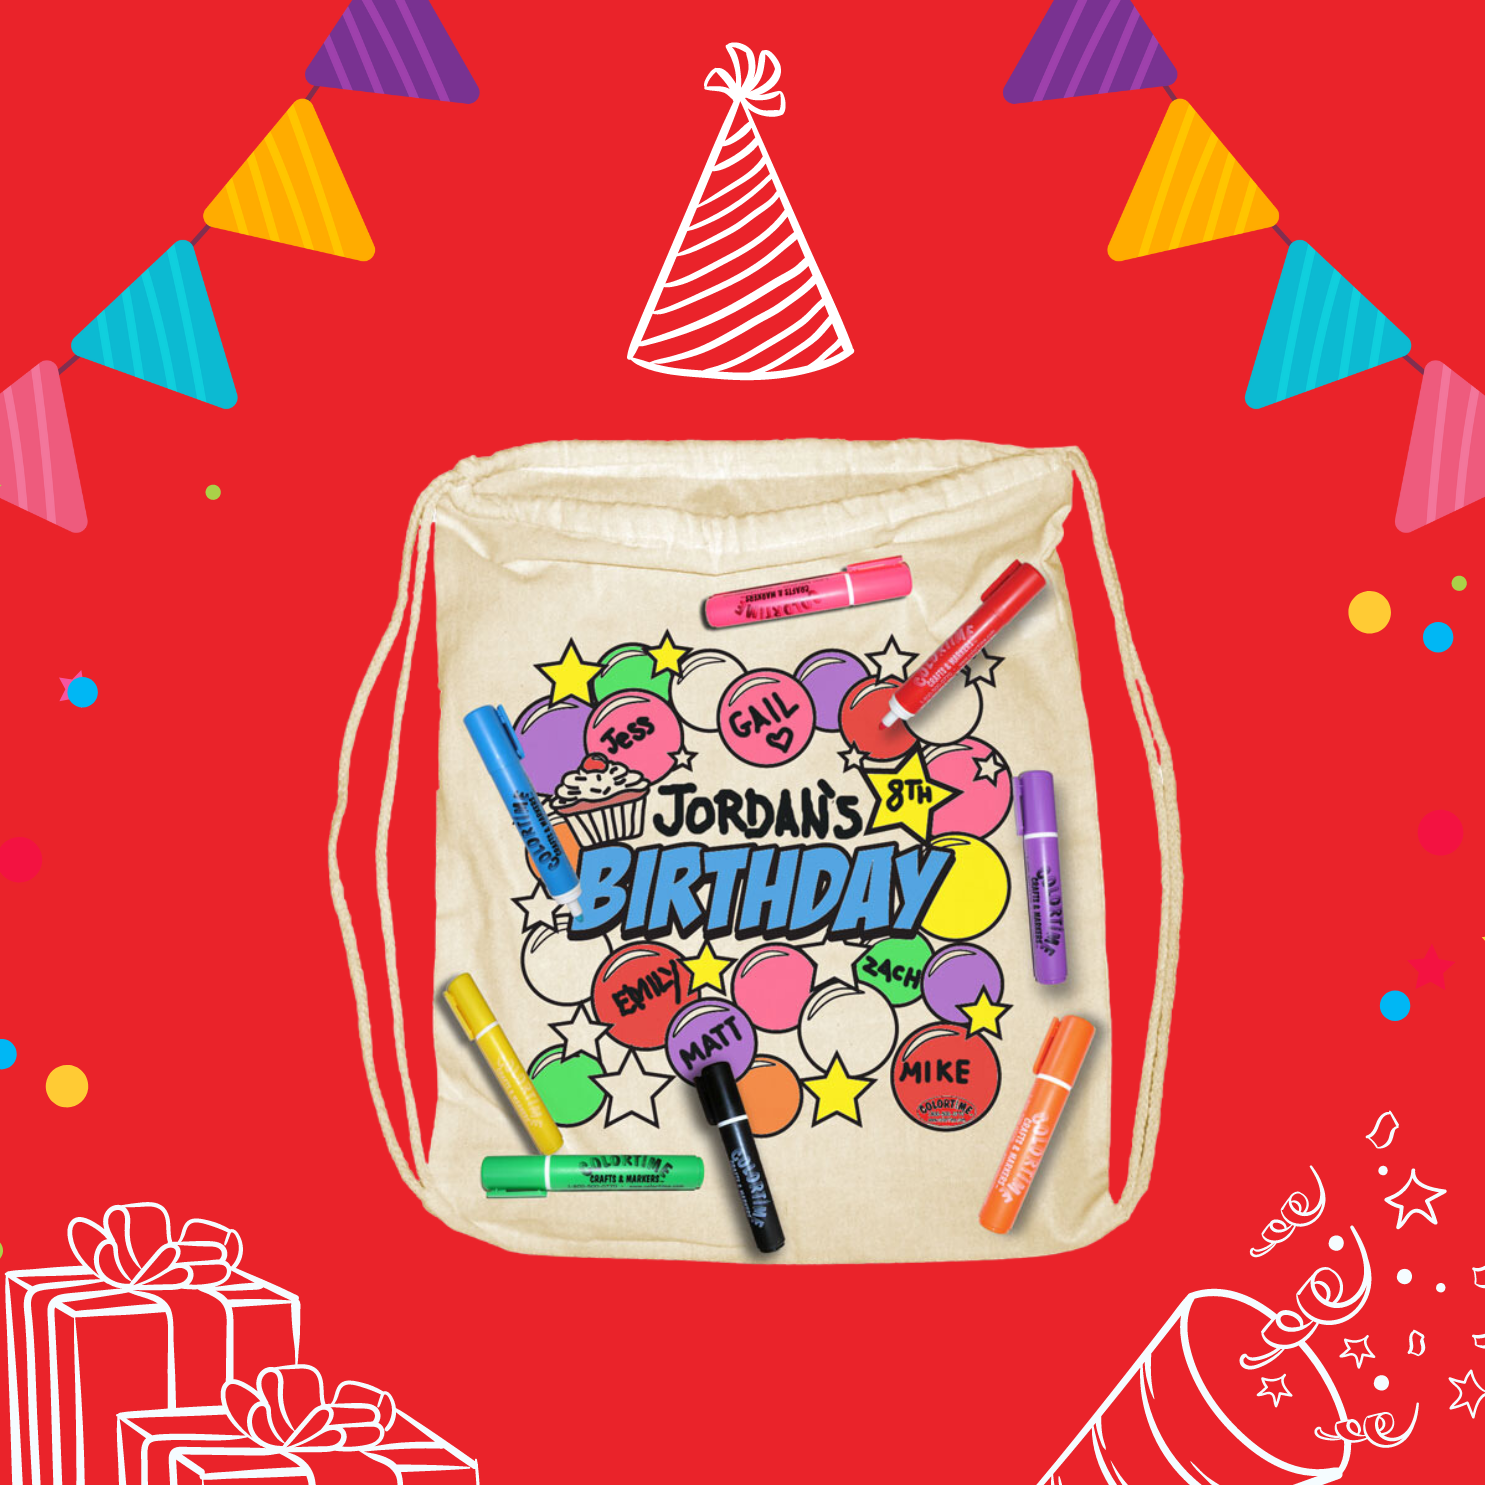 Colortime Birthday Club with drawstring bag and fabric markers